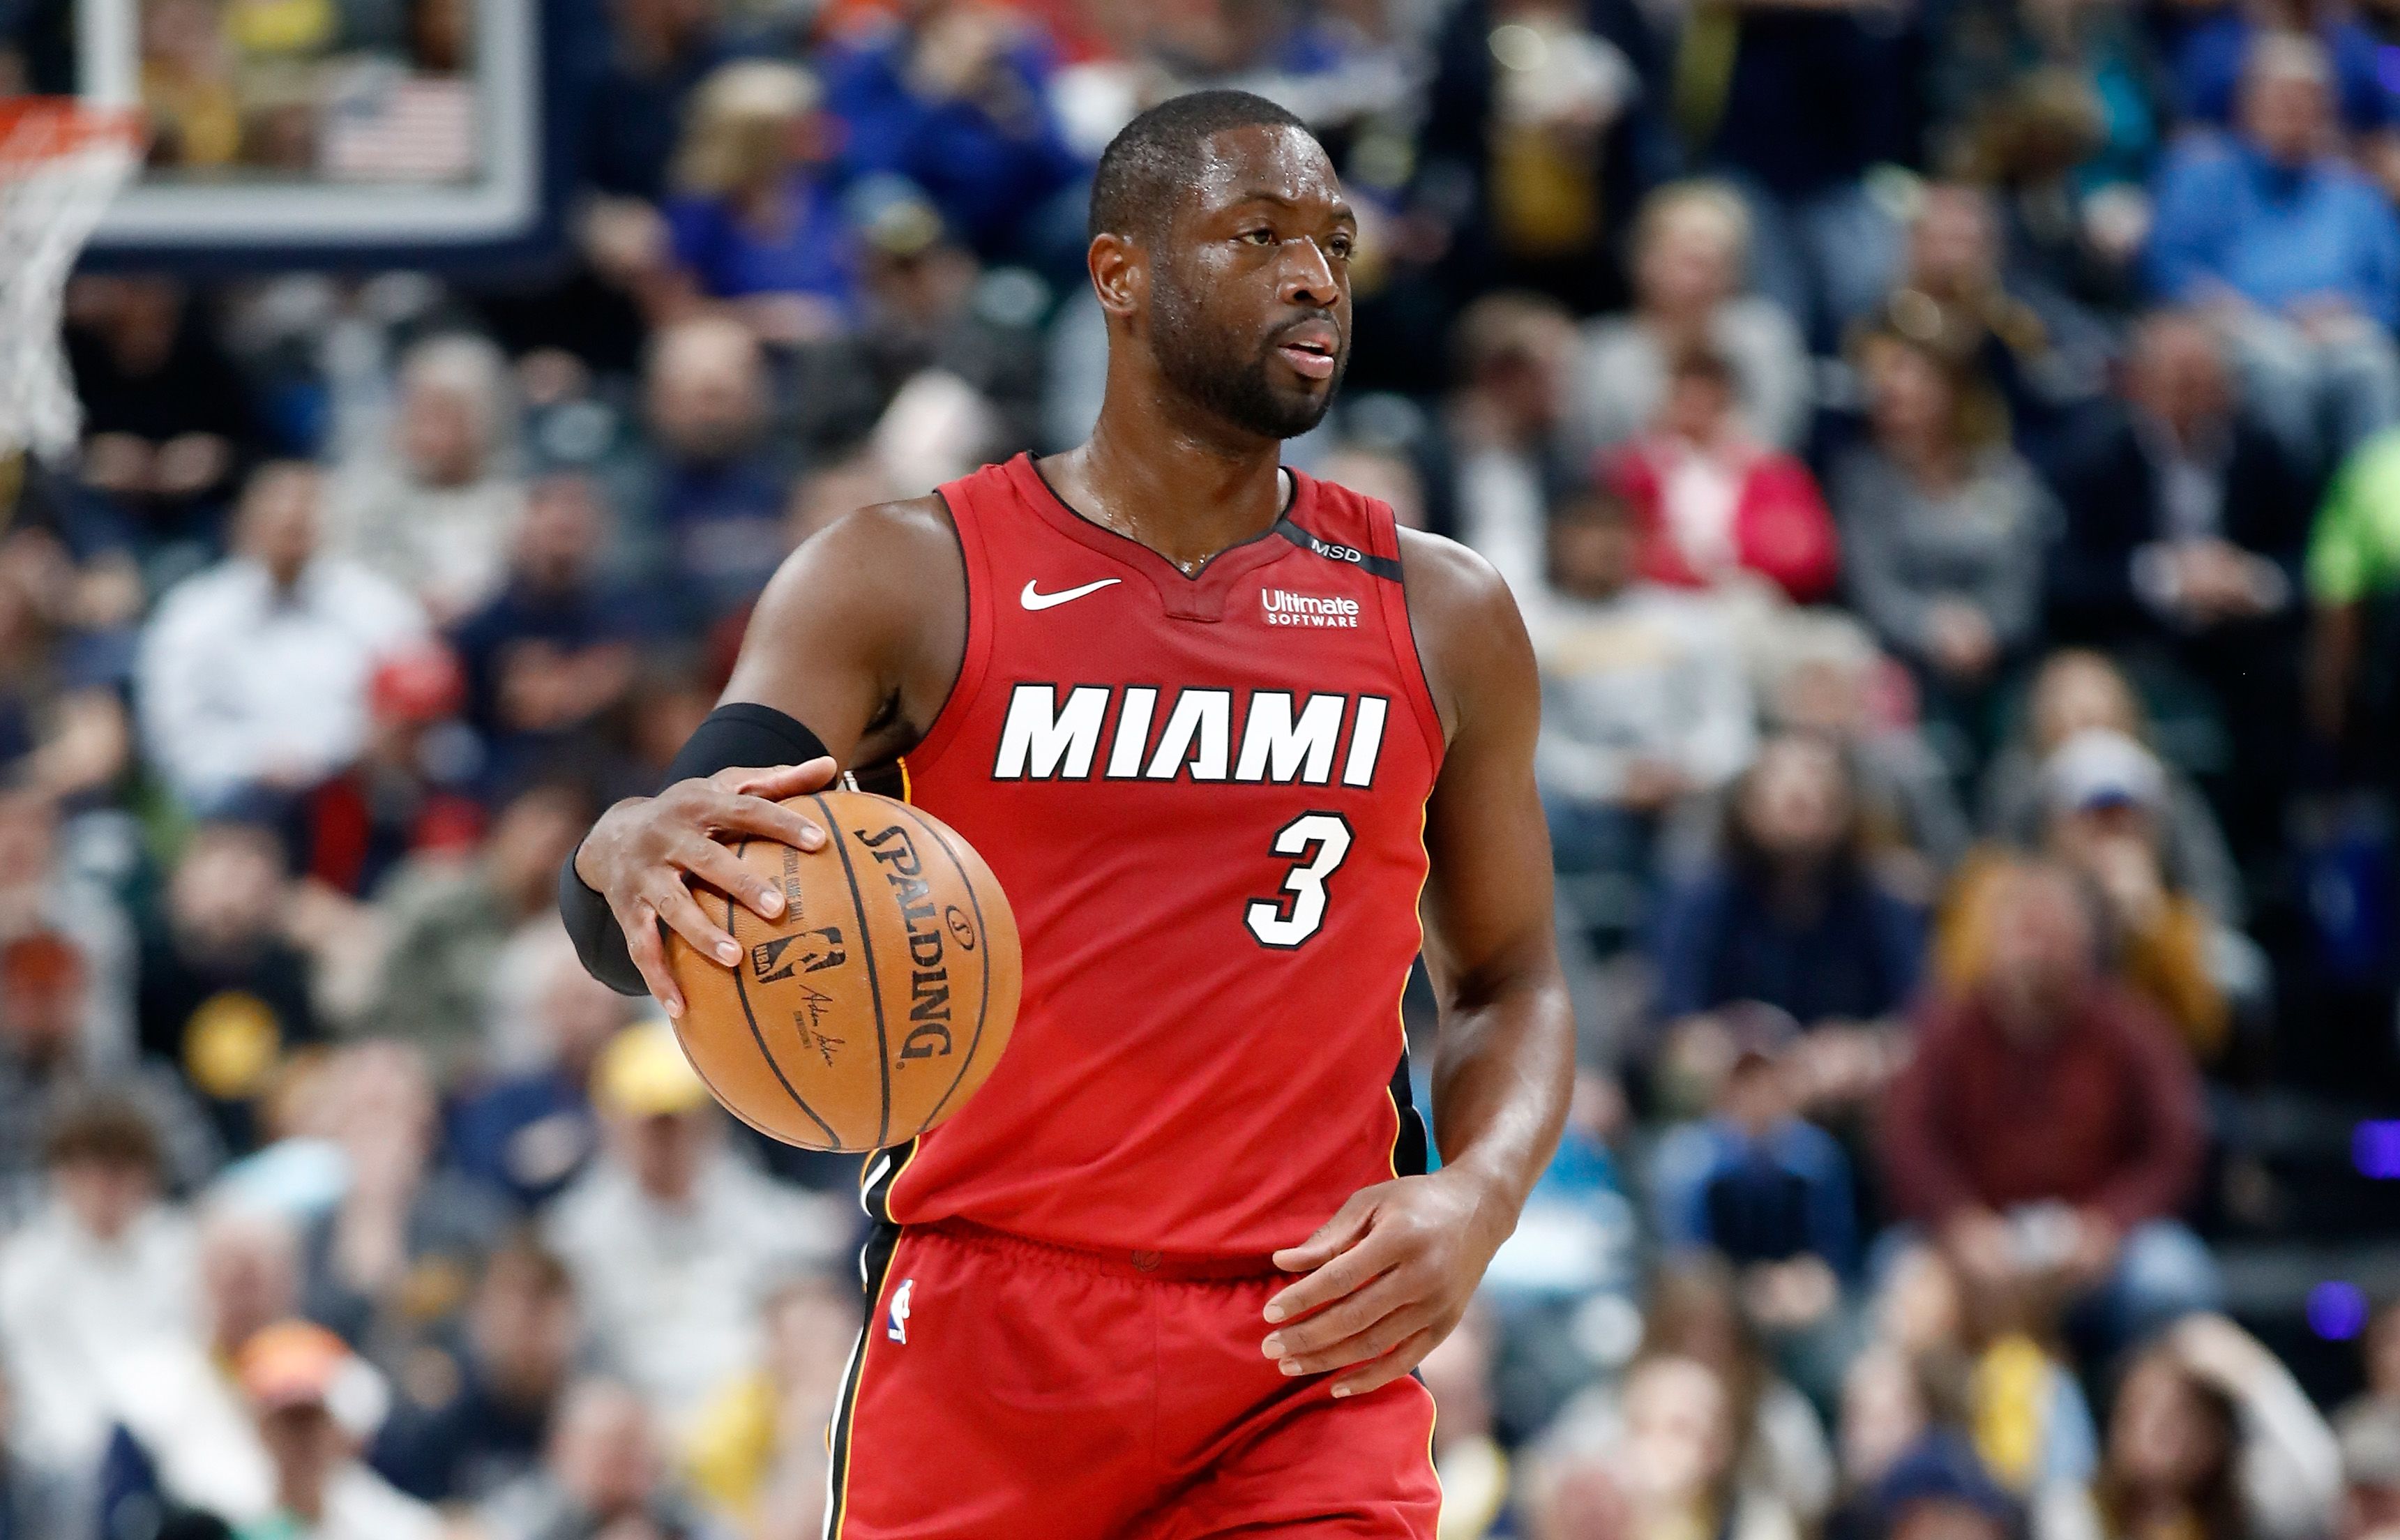 Is it just me or does Dwyane Wade now look more like an NFL player? : r/nba